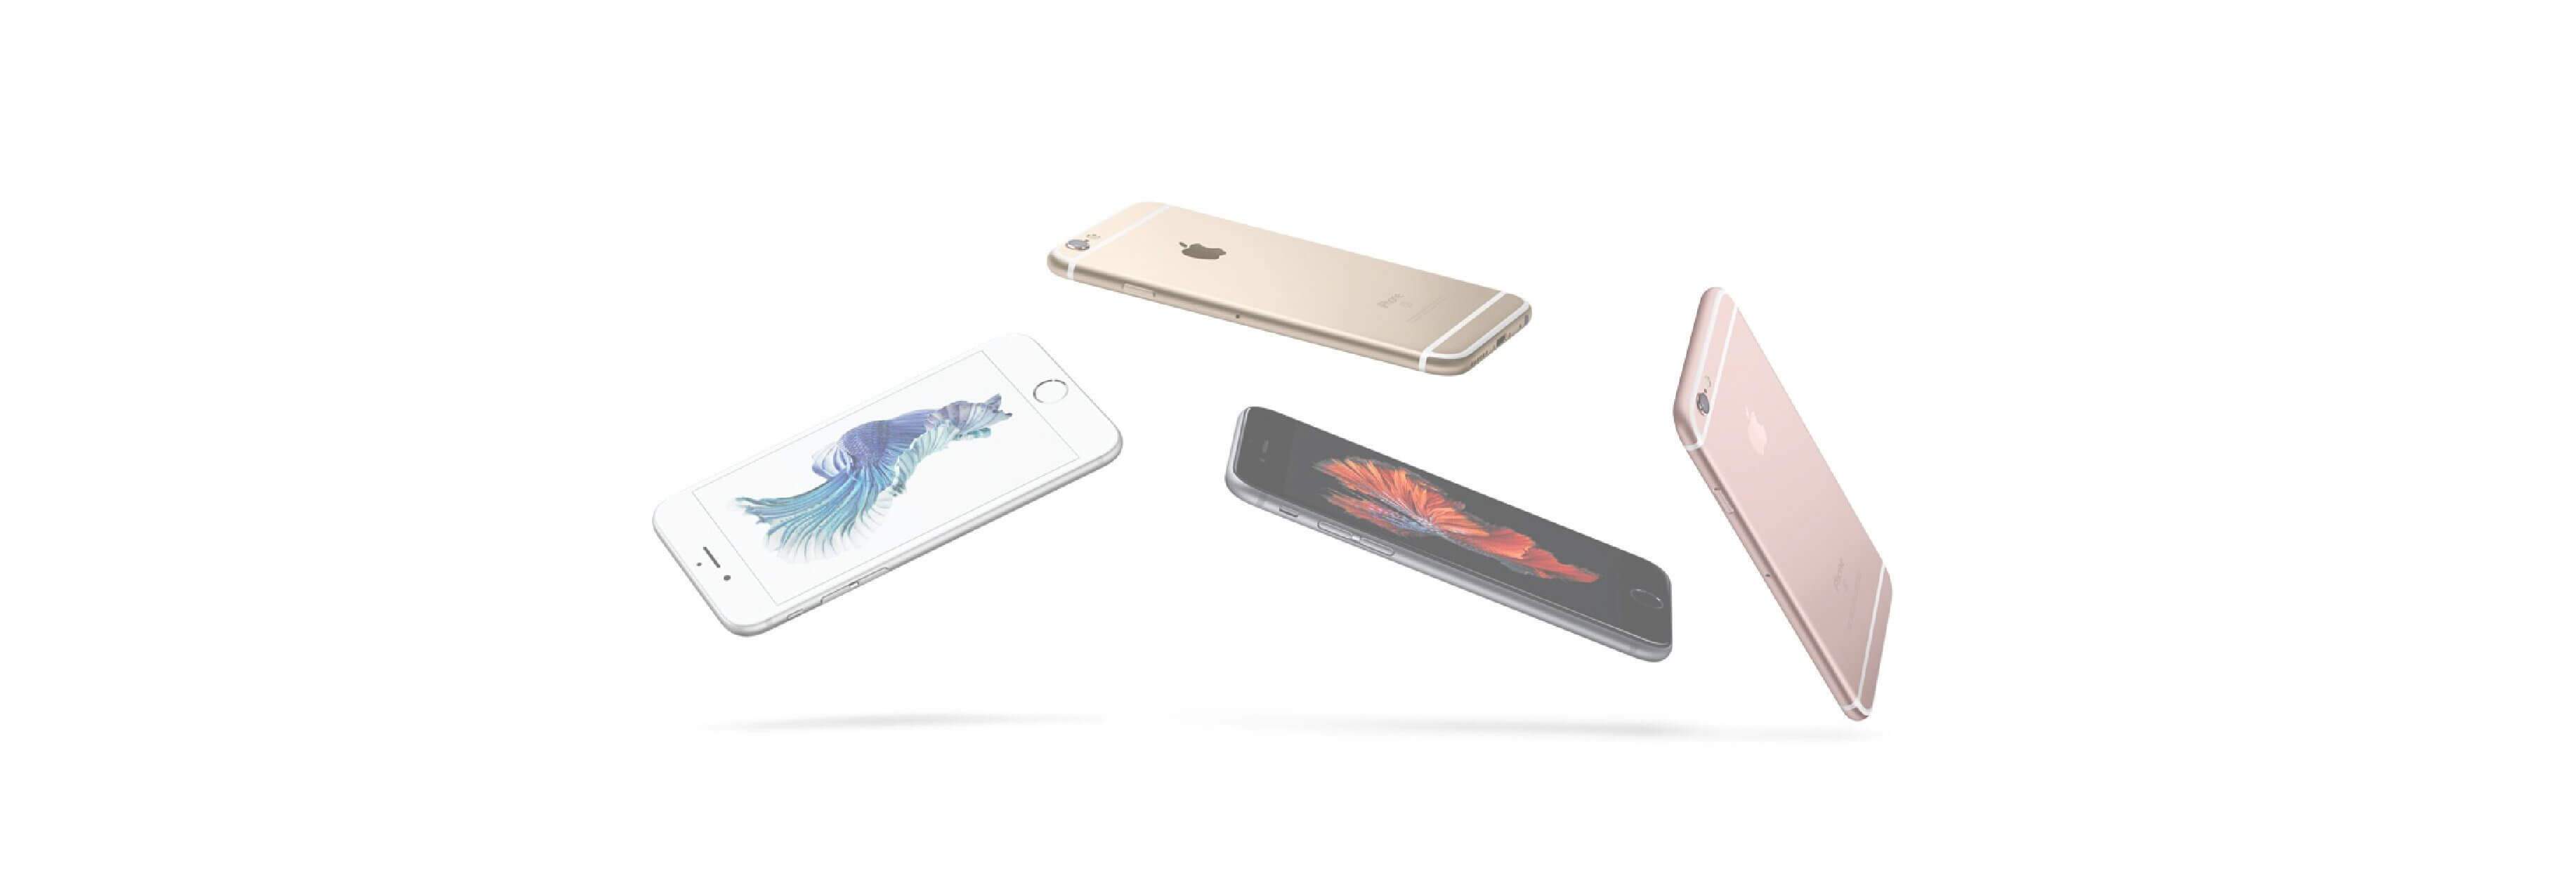 Will you buy a new or Refurbished iPhone? Read this first!